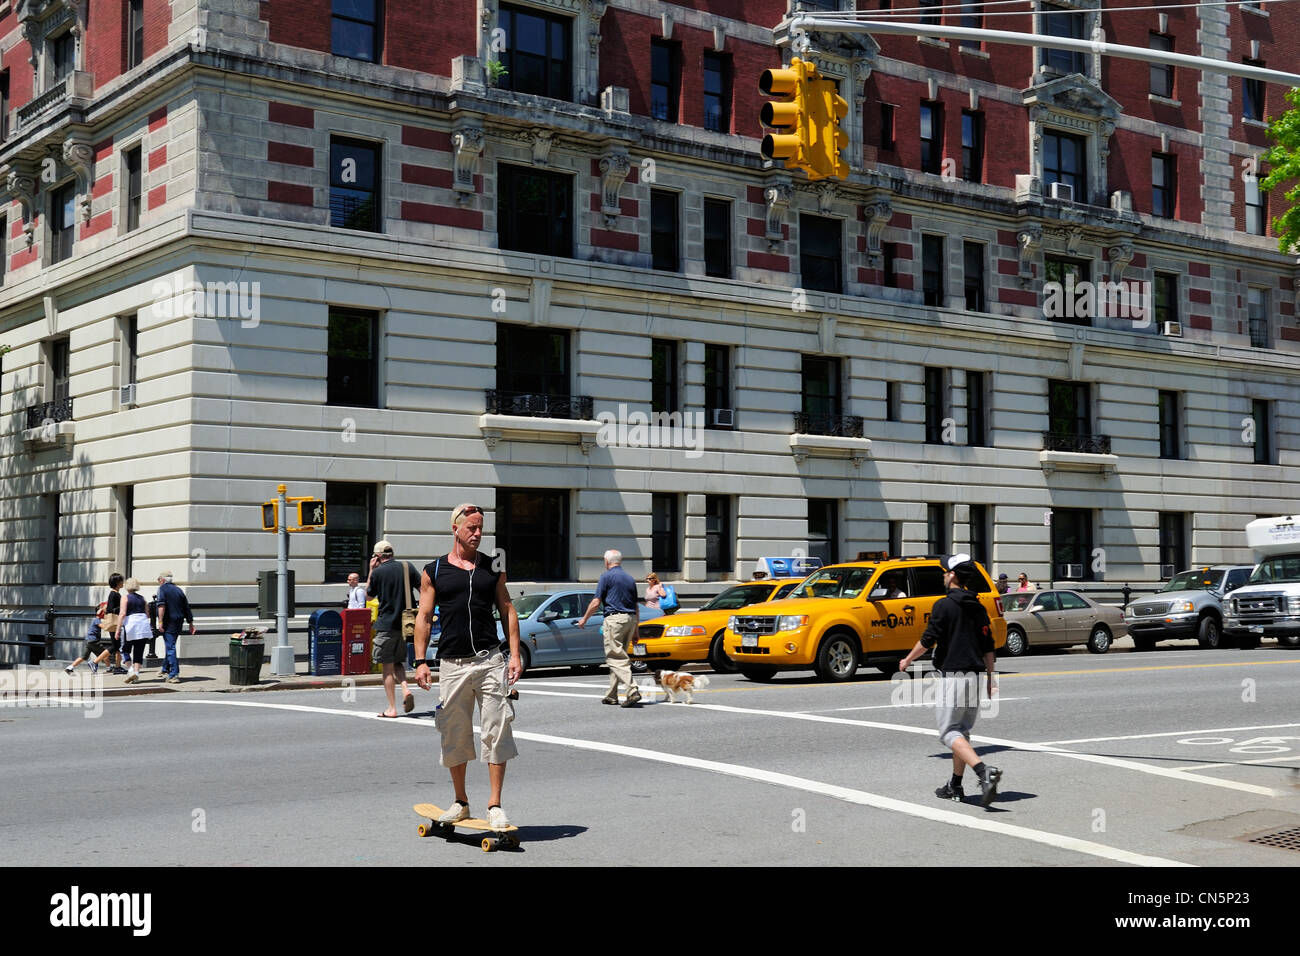 United States, New York City, Manhattan, Upper West side, skateboarder at the corner of Central Park West and 85th Street Stock Photo